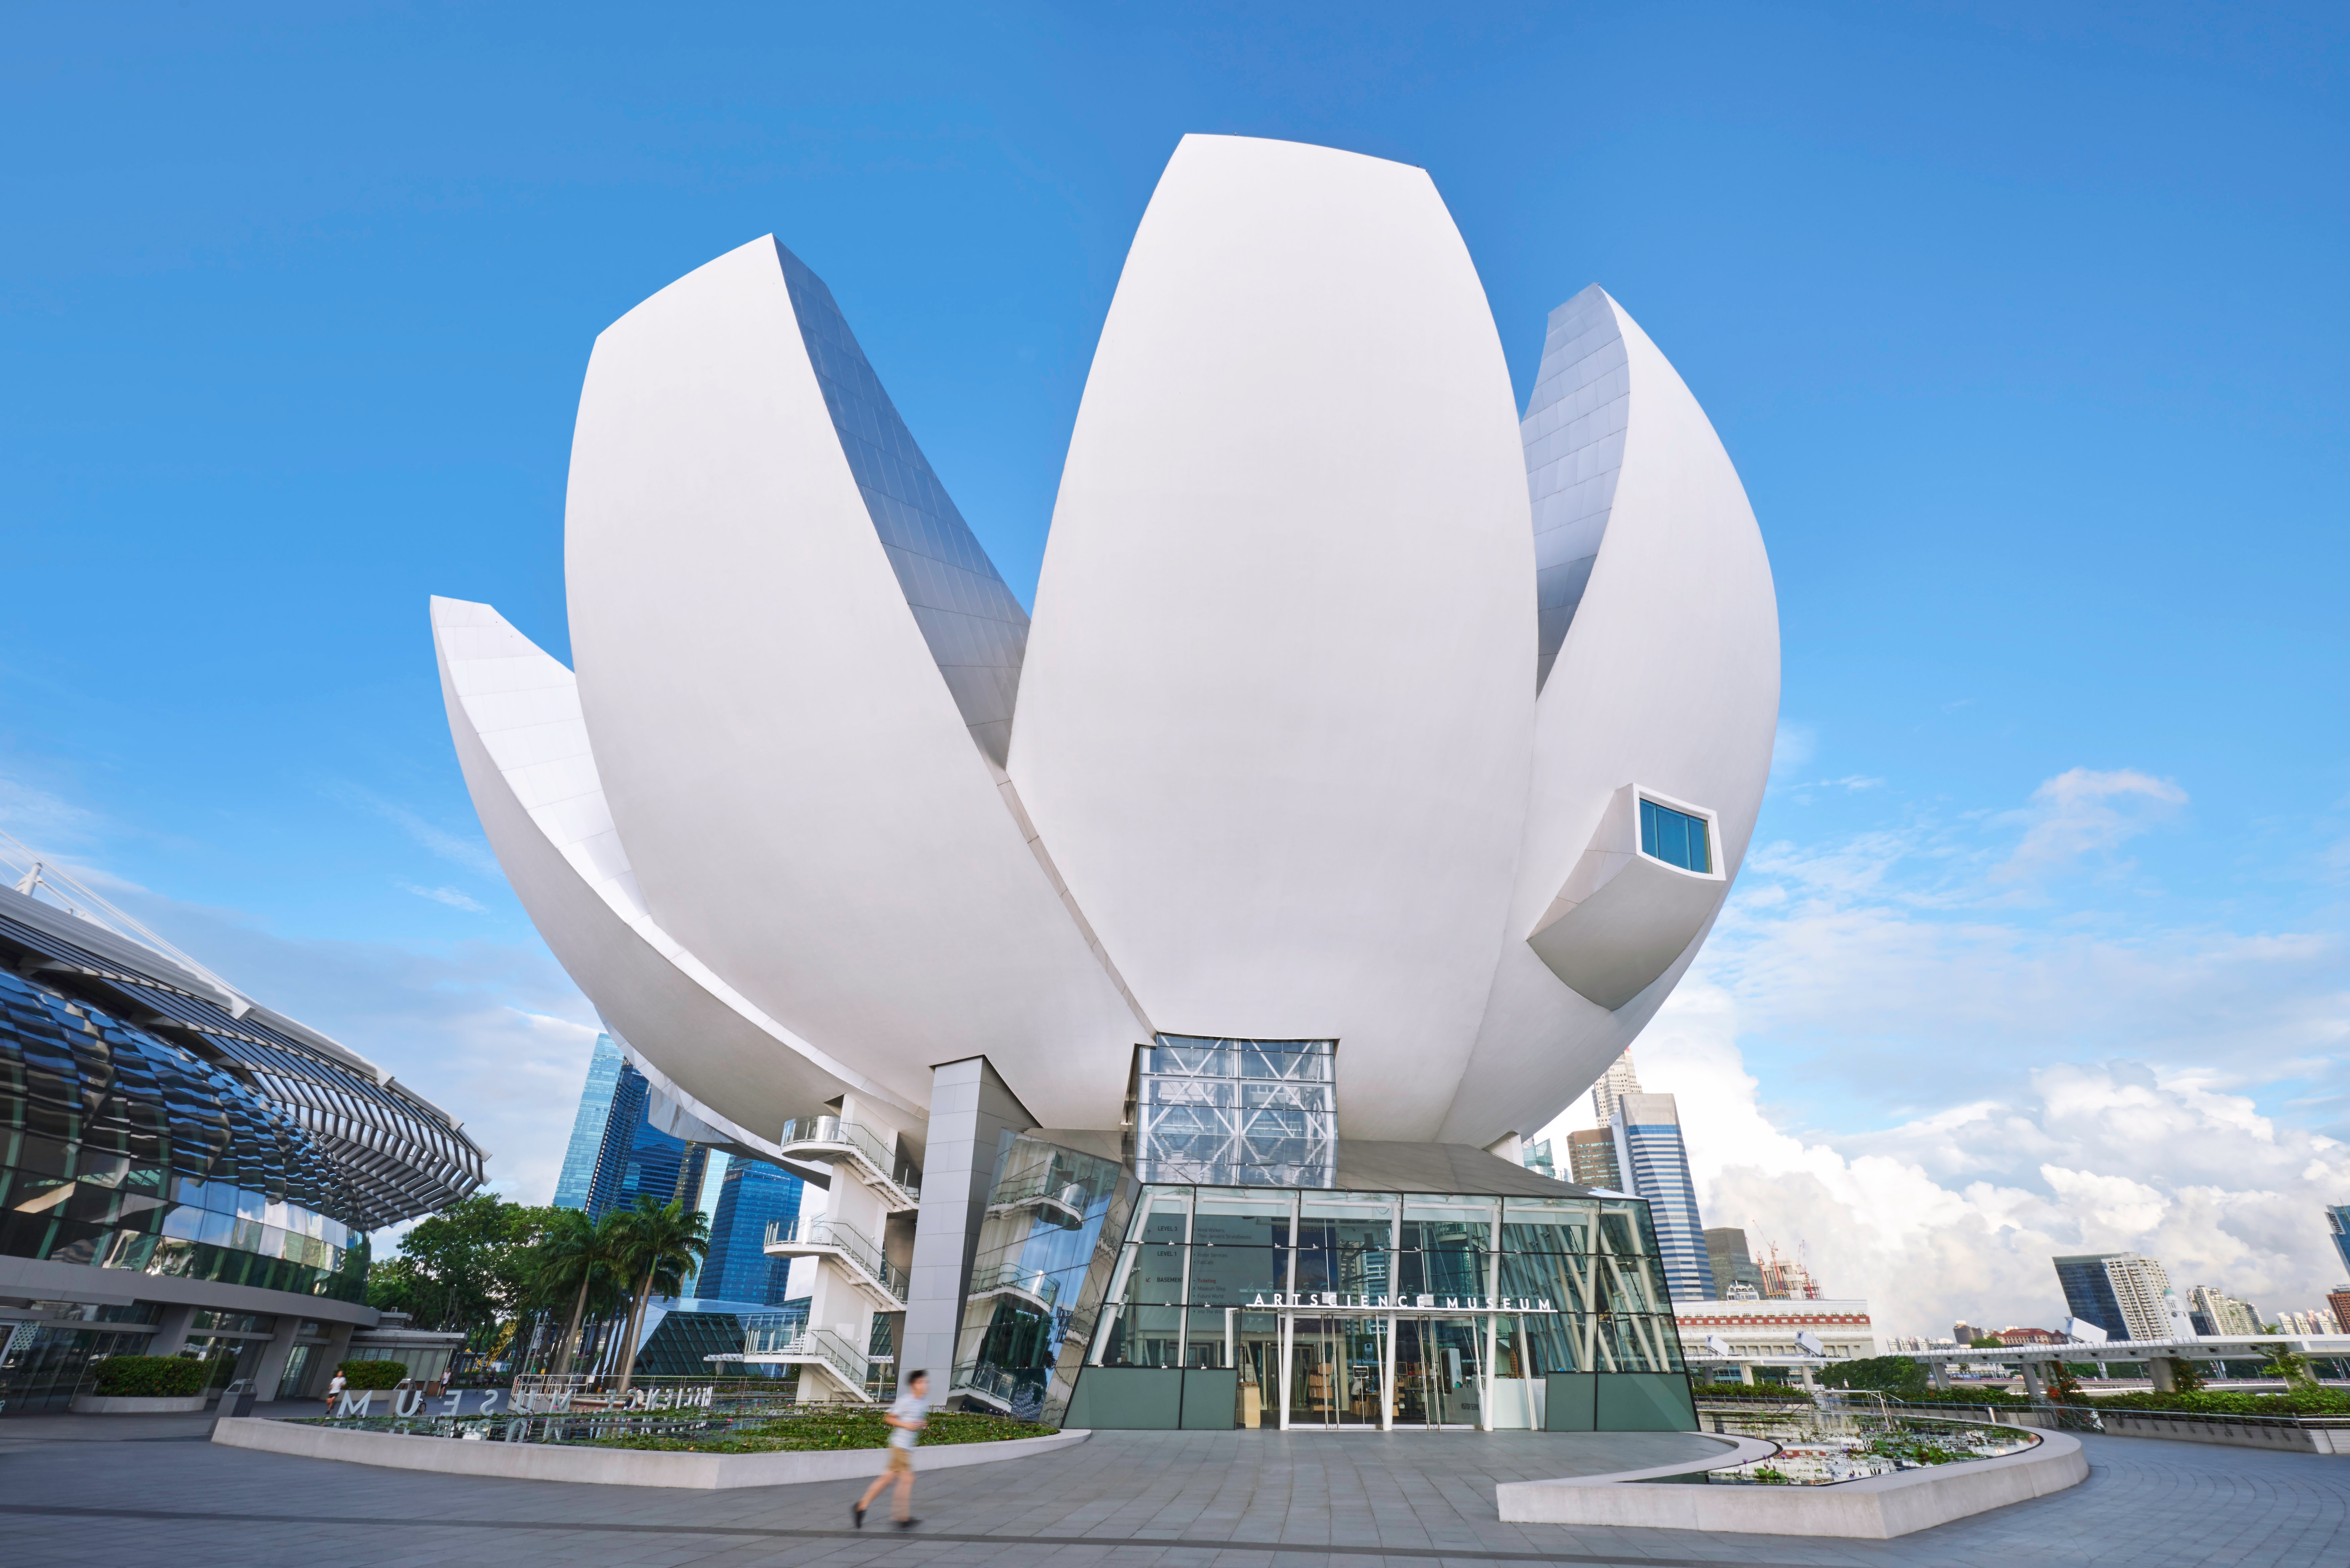 About Us | ArtScience Museum | Marina Bay Sands